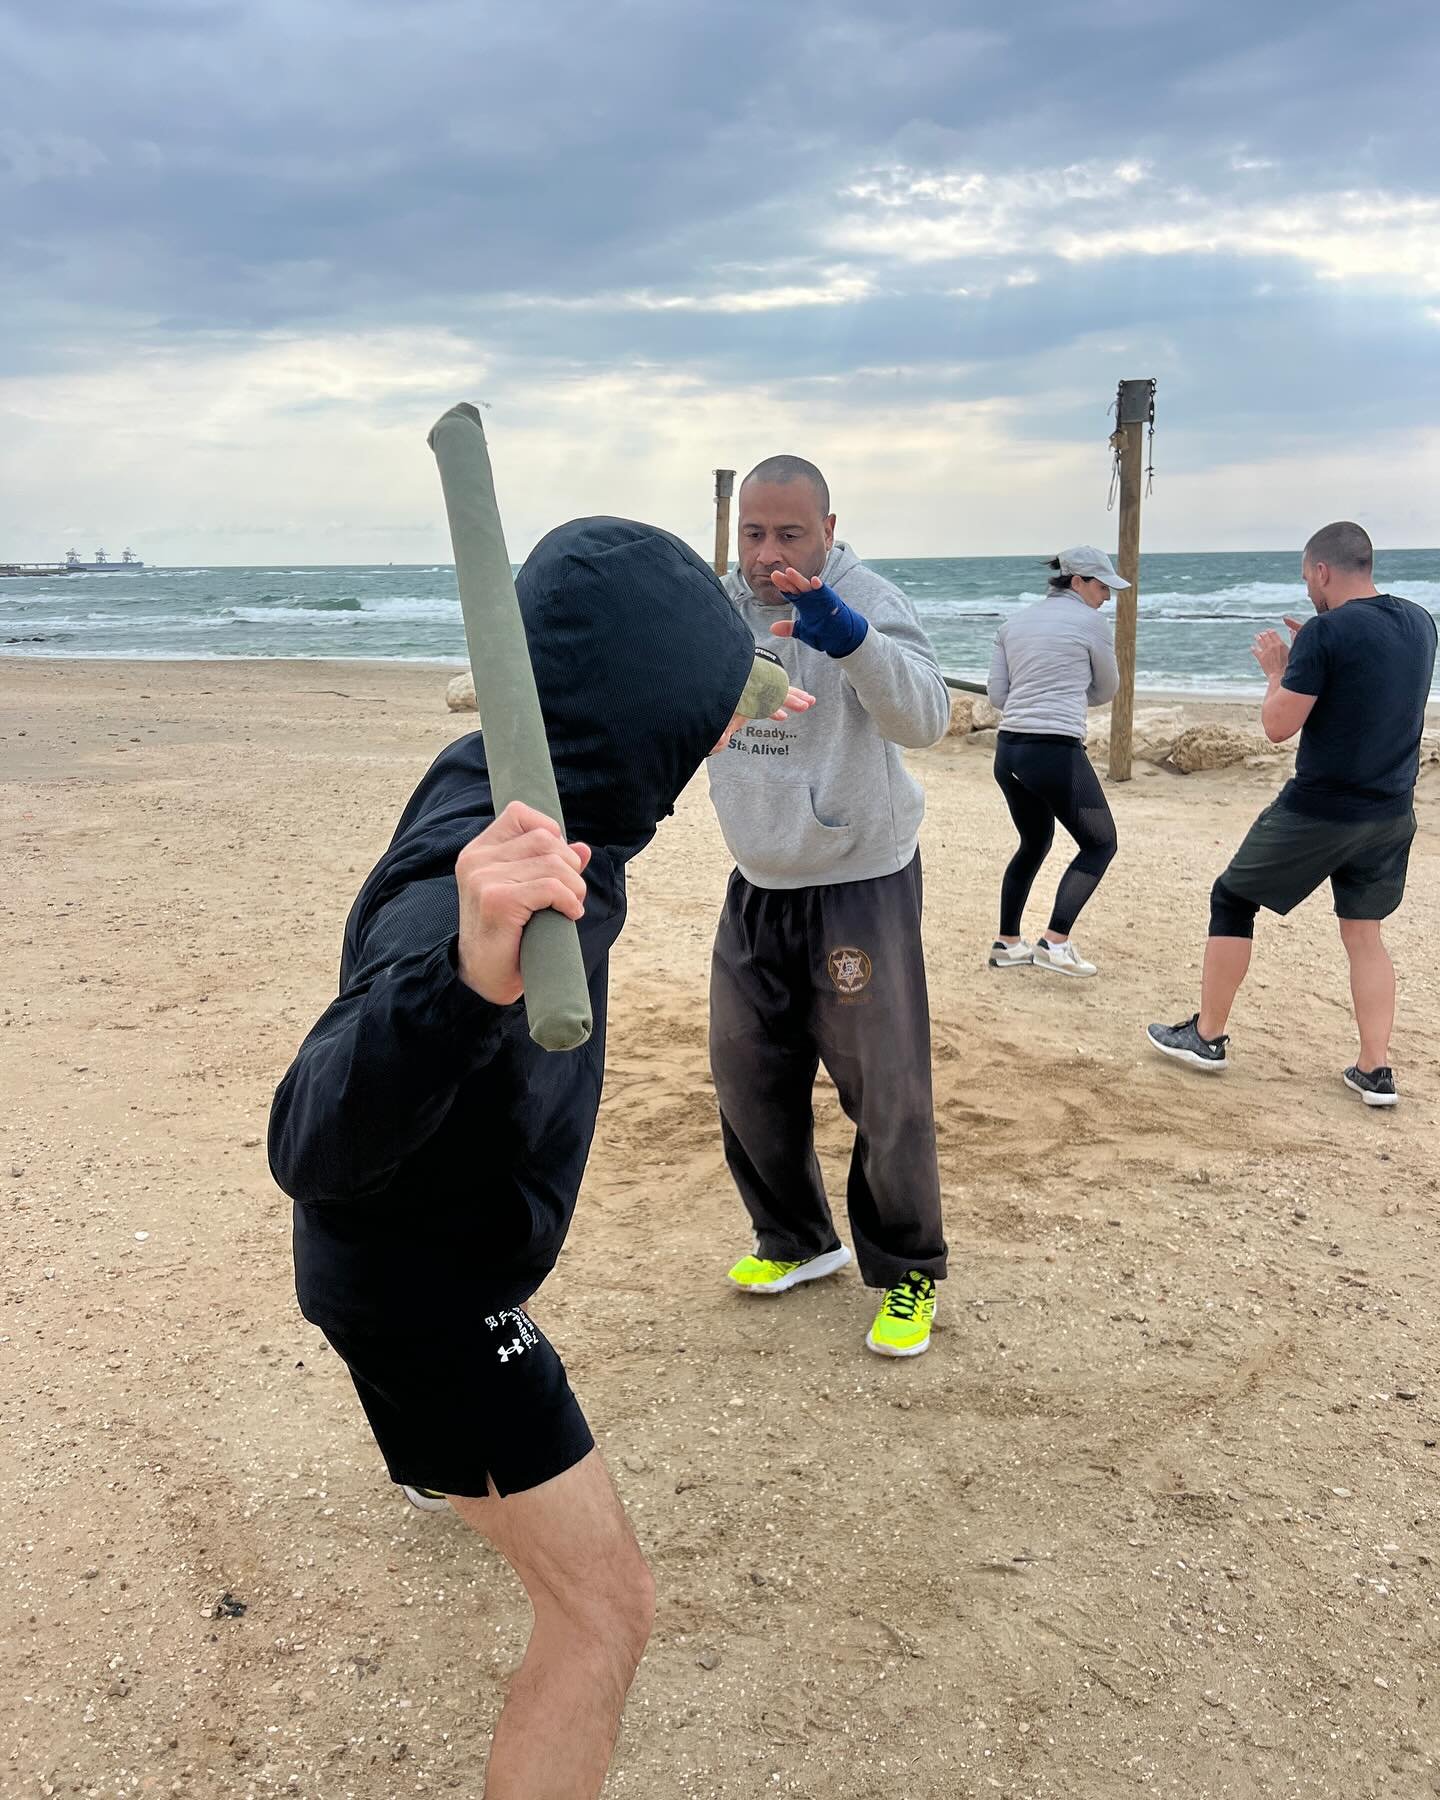 Last week, our Krav Maga Instructor Course in Israel brought together a unique group of participants from Japan, France, Portugal, the USA, Germany, and a visit from a friend in Mexico. It&rsquo;s these small, intimate groups that make each course ex